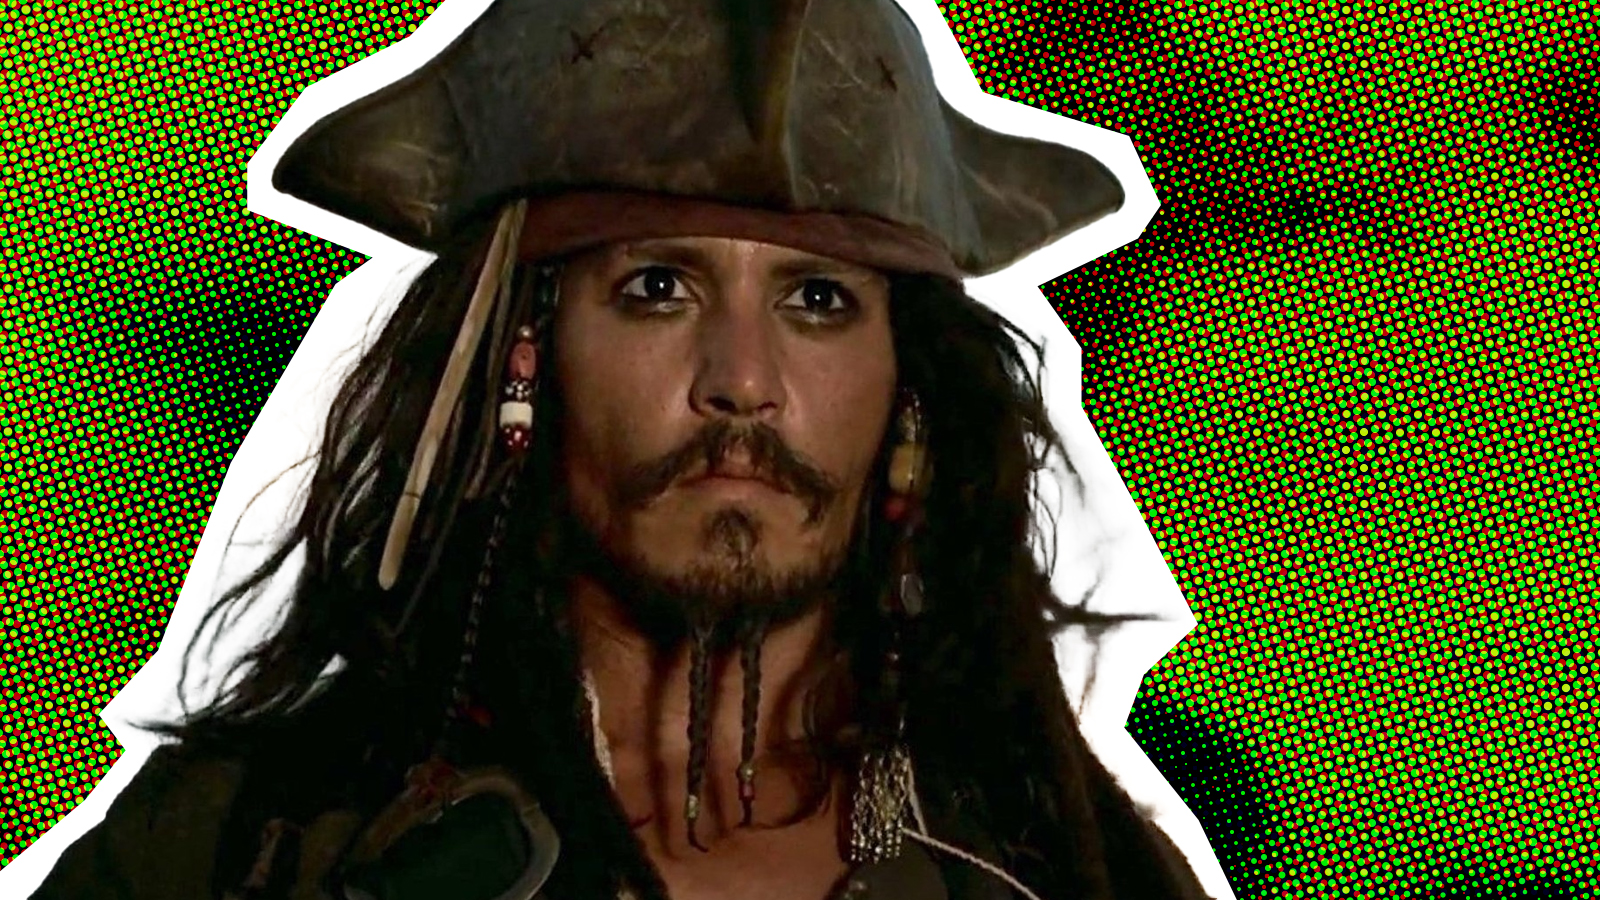 File:Dale Clark poses as Johnny Depp, in Pirates of the Caribbean,  24391.jpg - Wikipedia